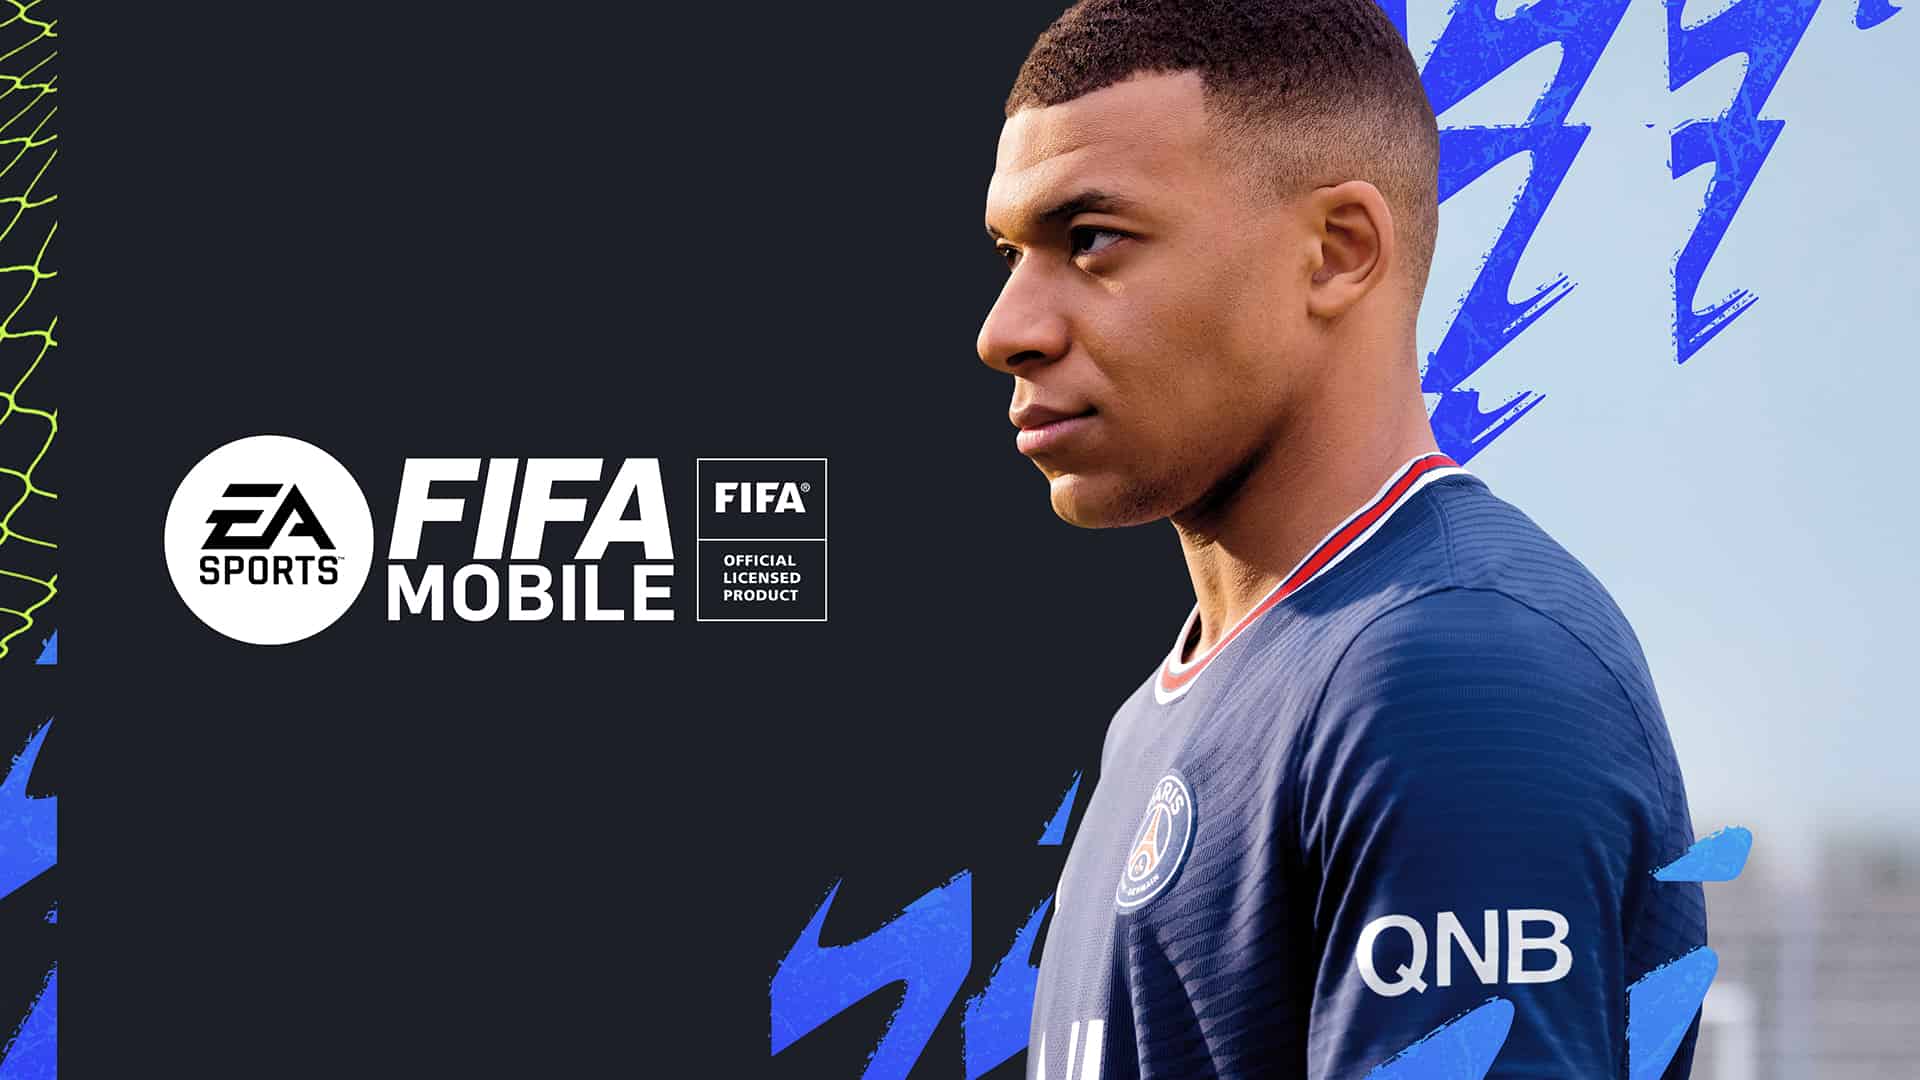 fifa-mobile-new-update-17-1-01-is-now-available-release-notes